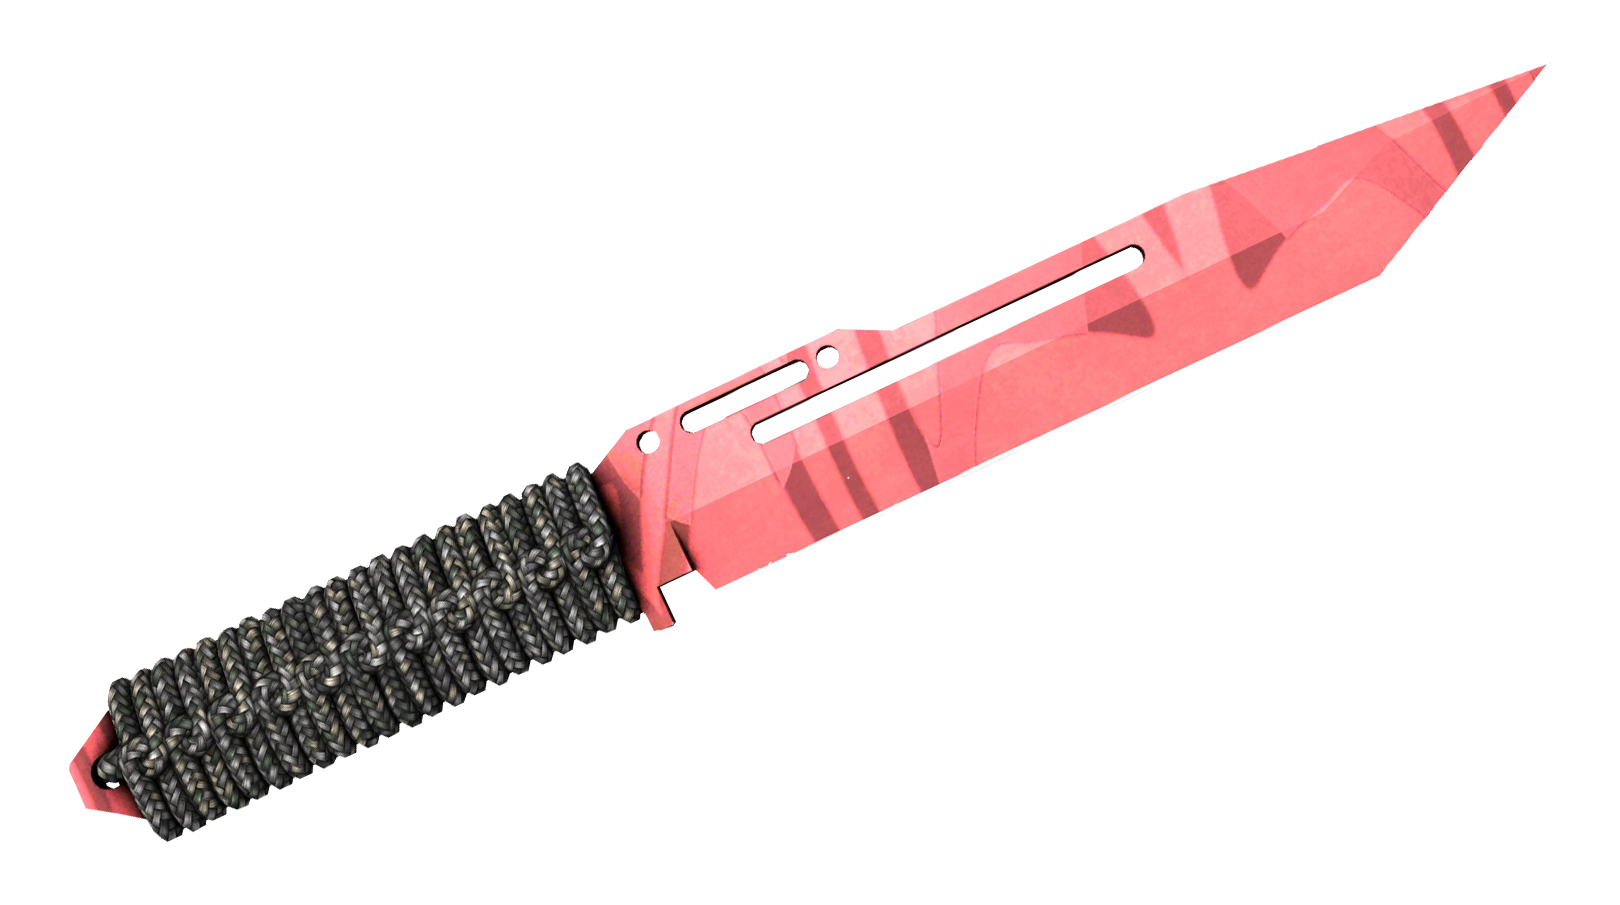 Paracord Knife Slaughter Large Rendering